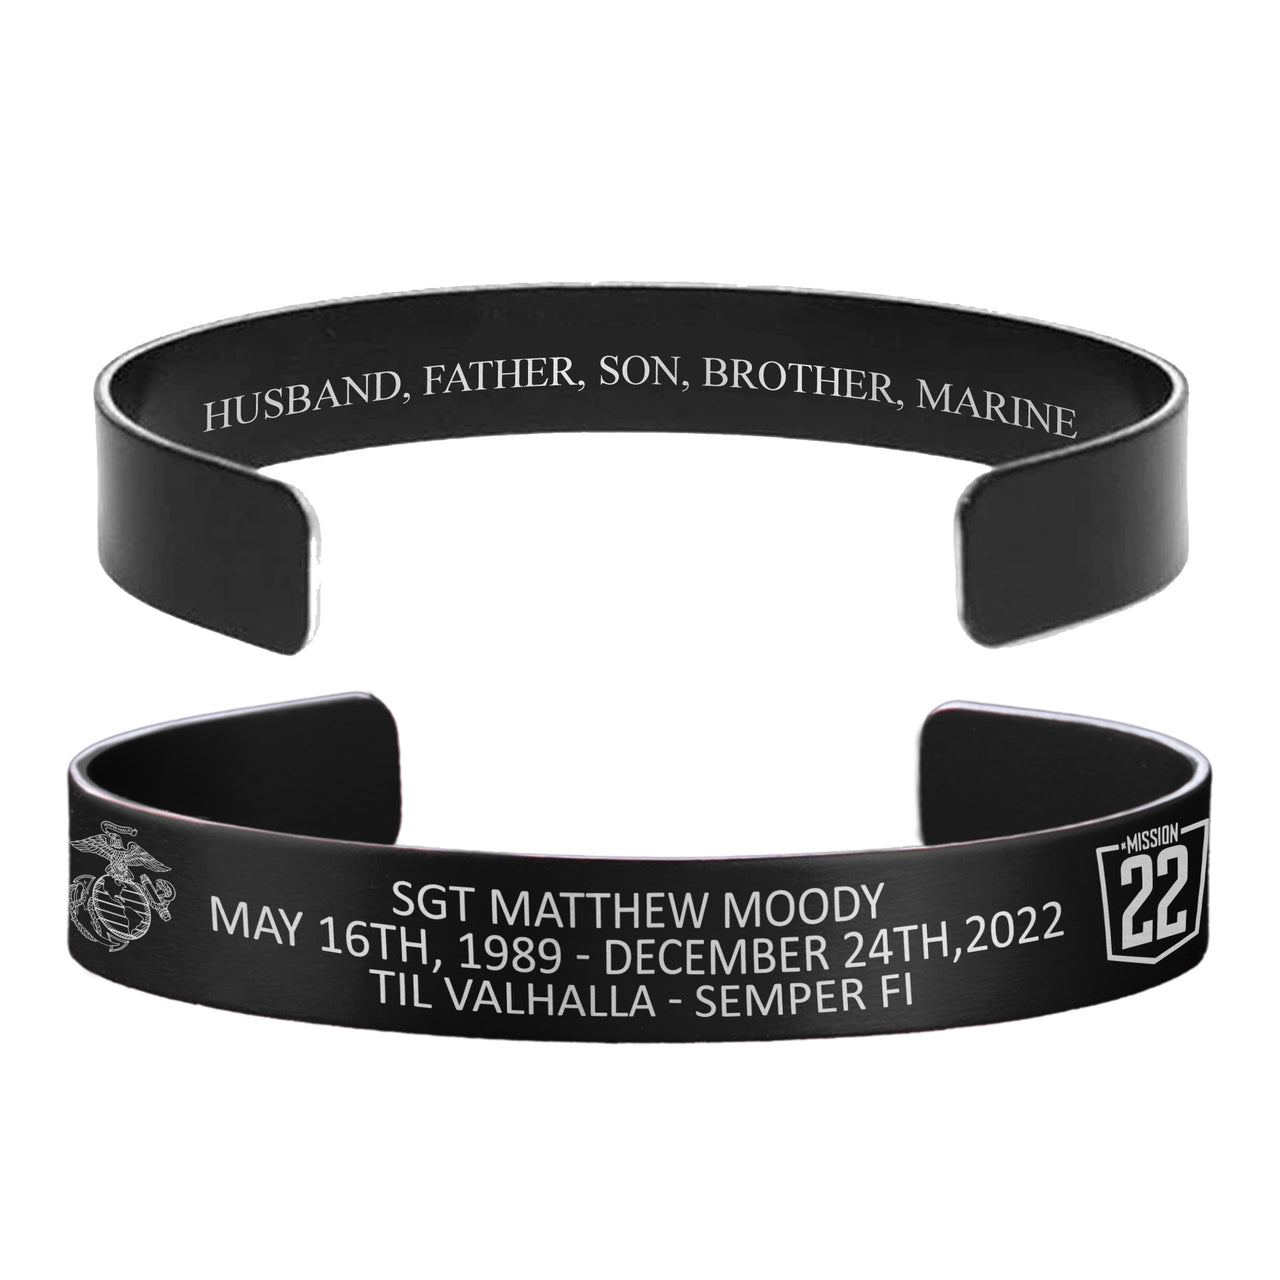 SGT Matthew Moody Memorial Band – Hosted by the Moody Family